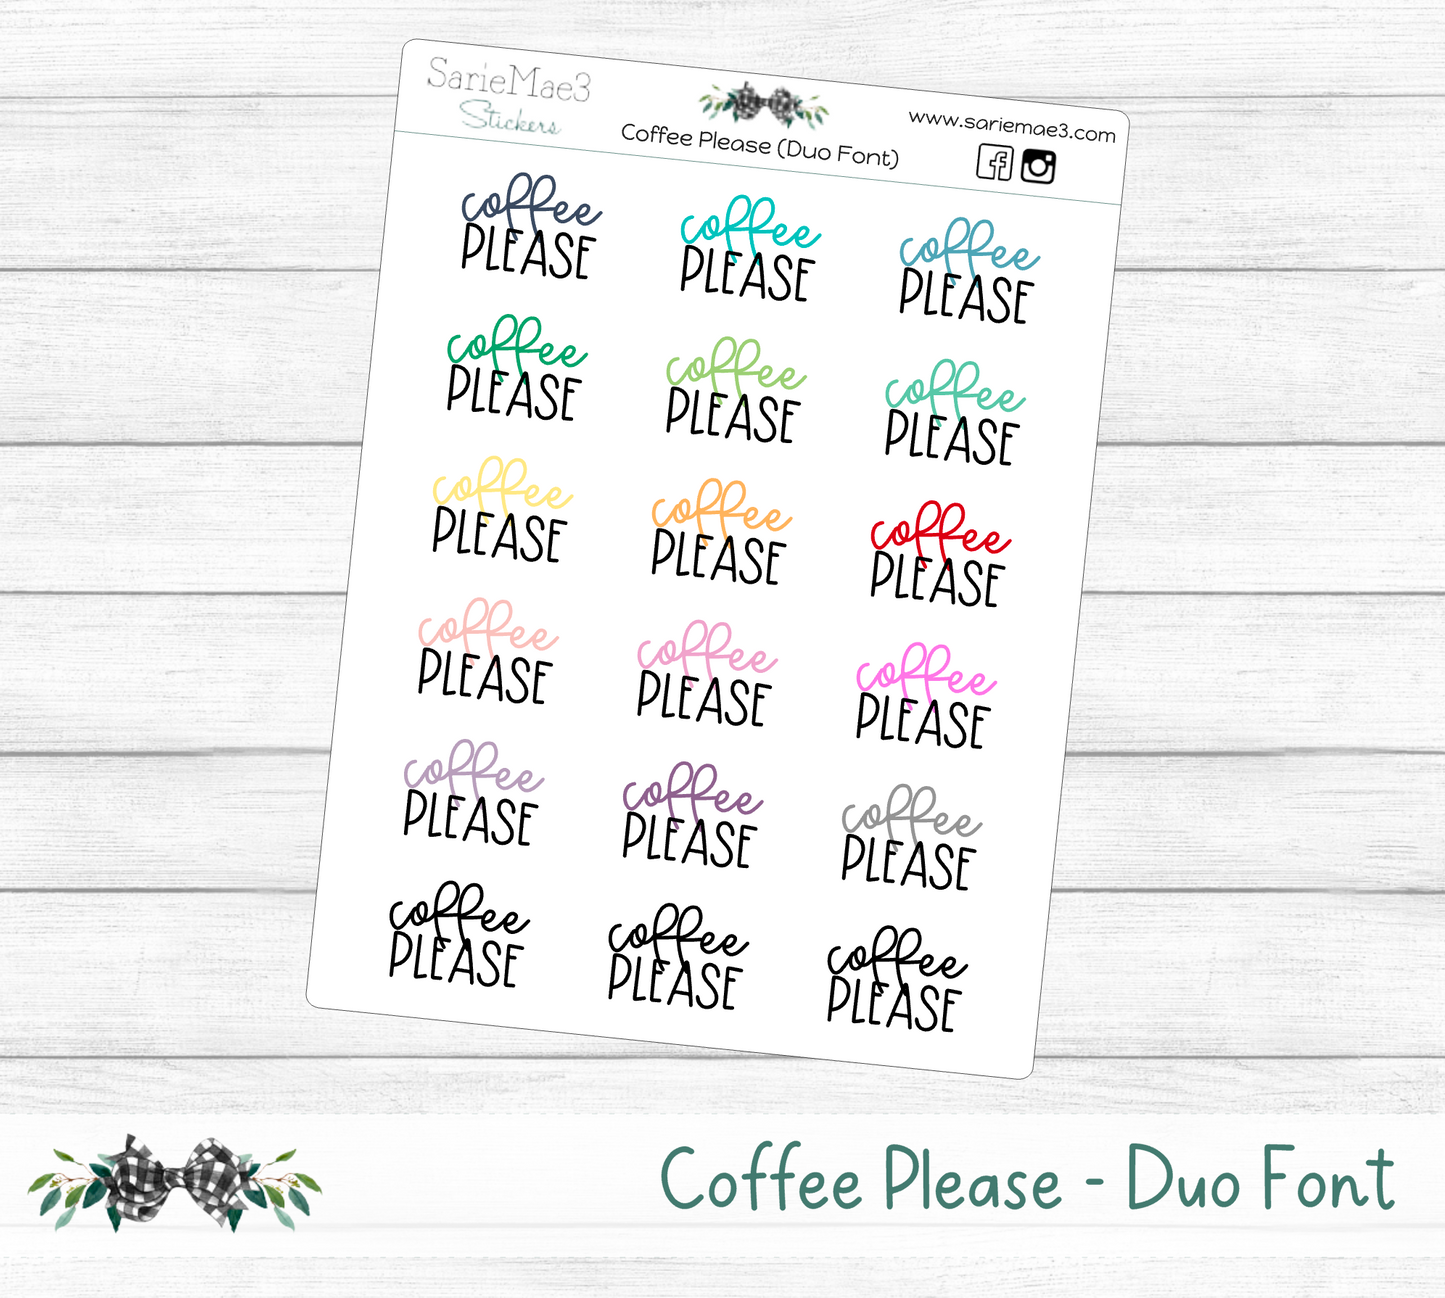 Coffee Please (Duo Font)